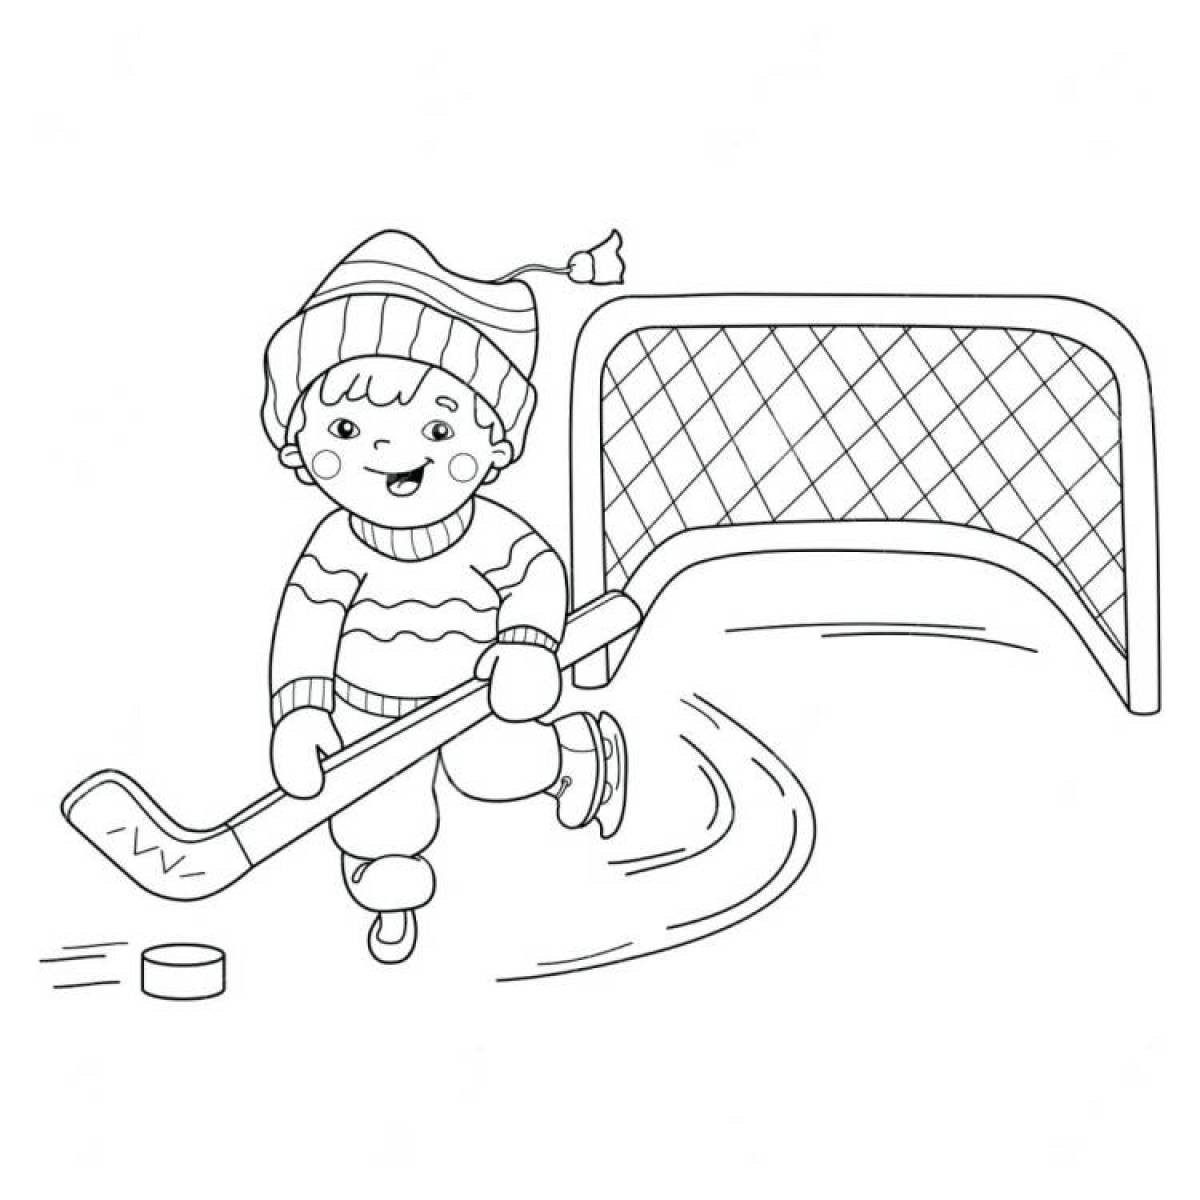 Animated winter sports coloring page